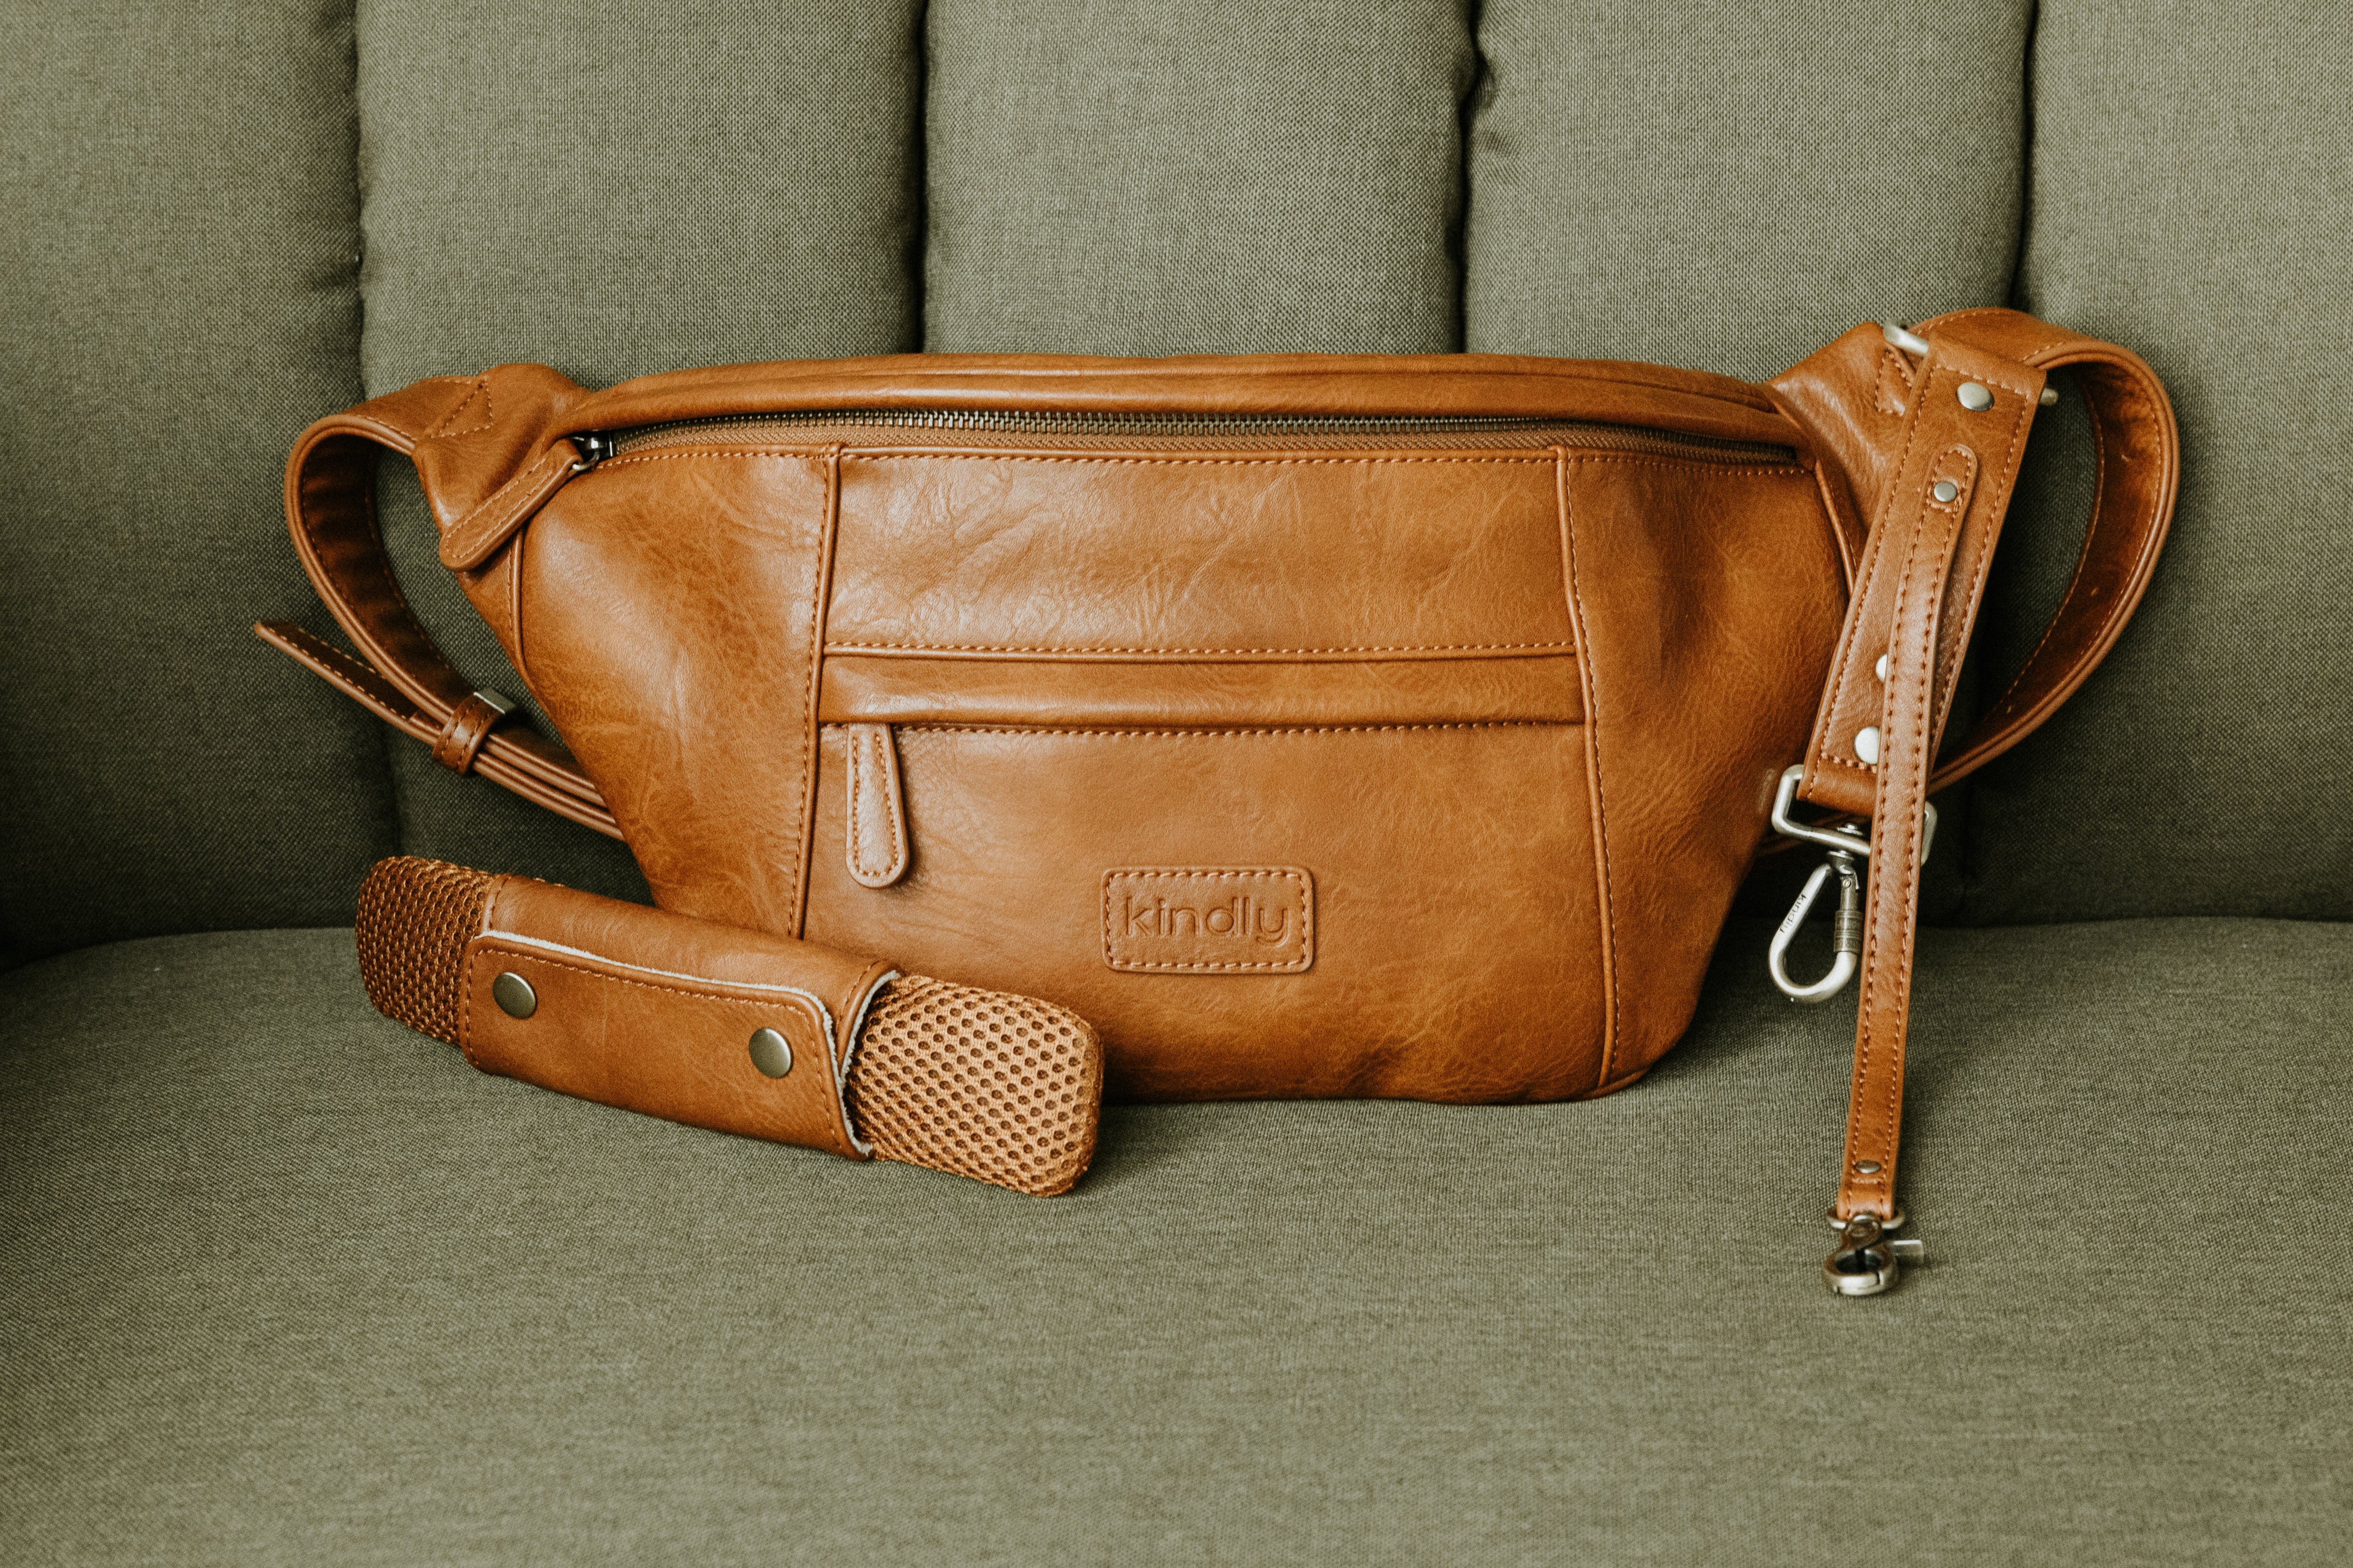 Bale Sling Bag | Handmade with Ethiopian Leather – Gifts for Good